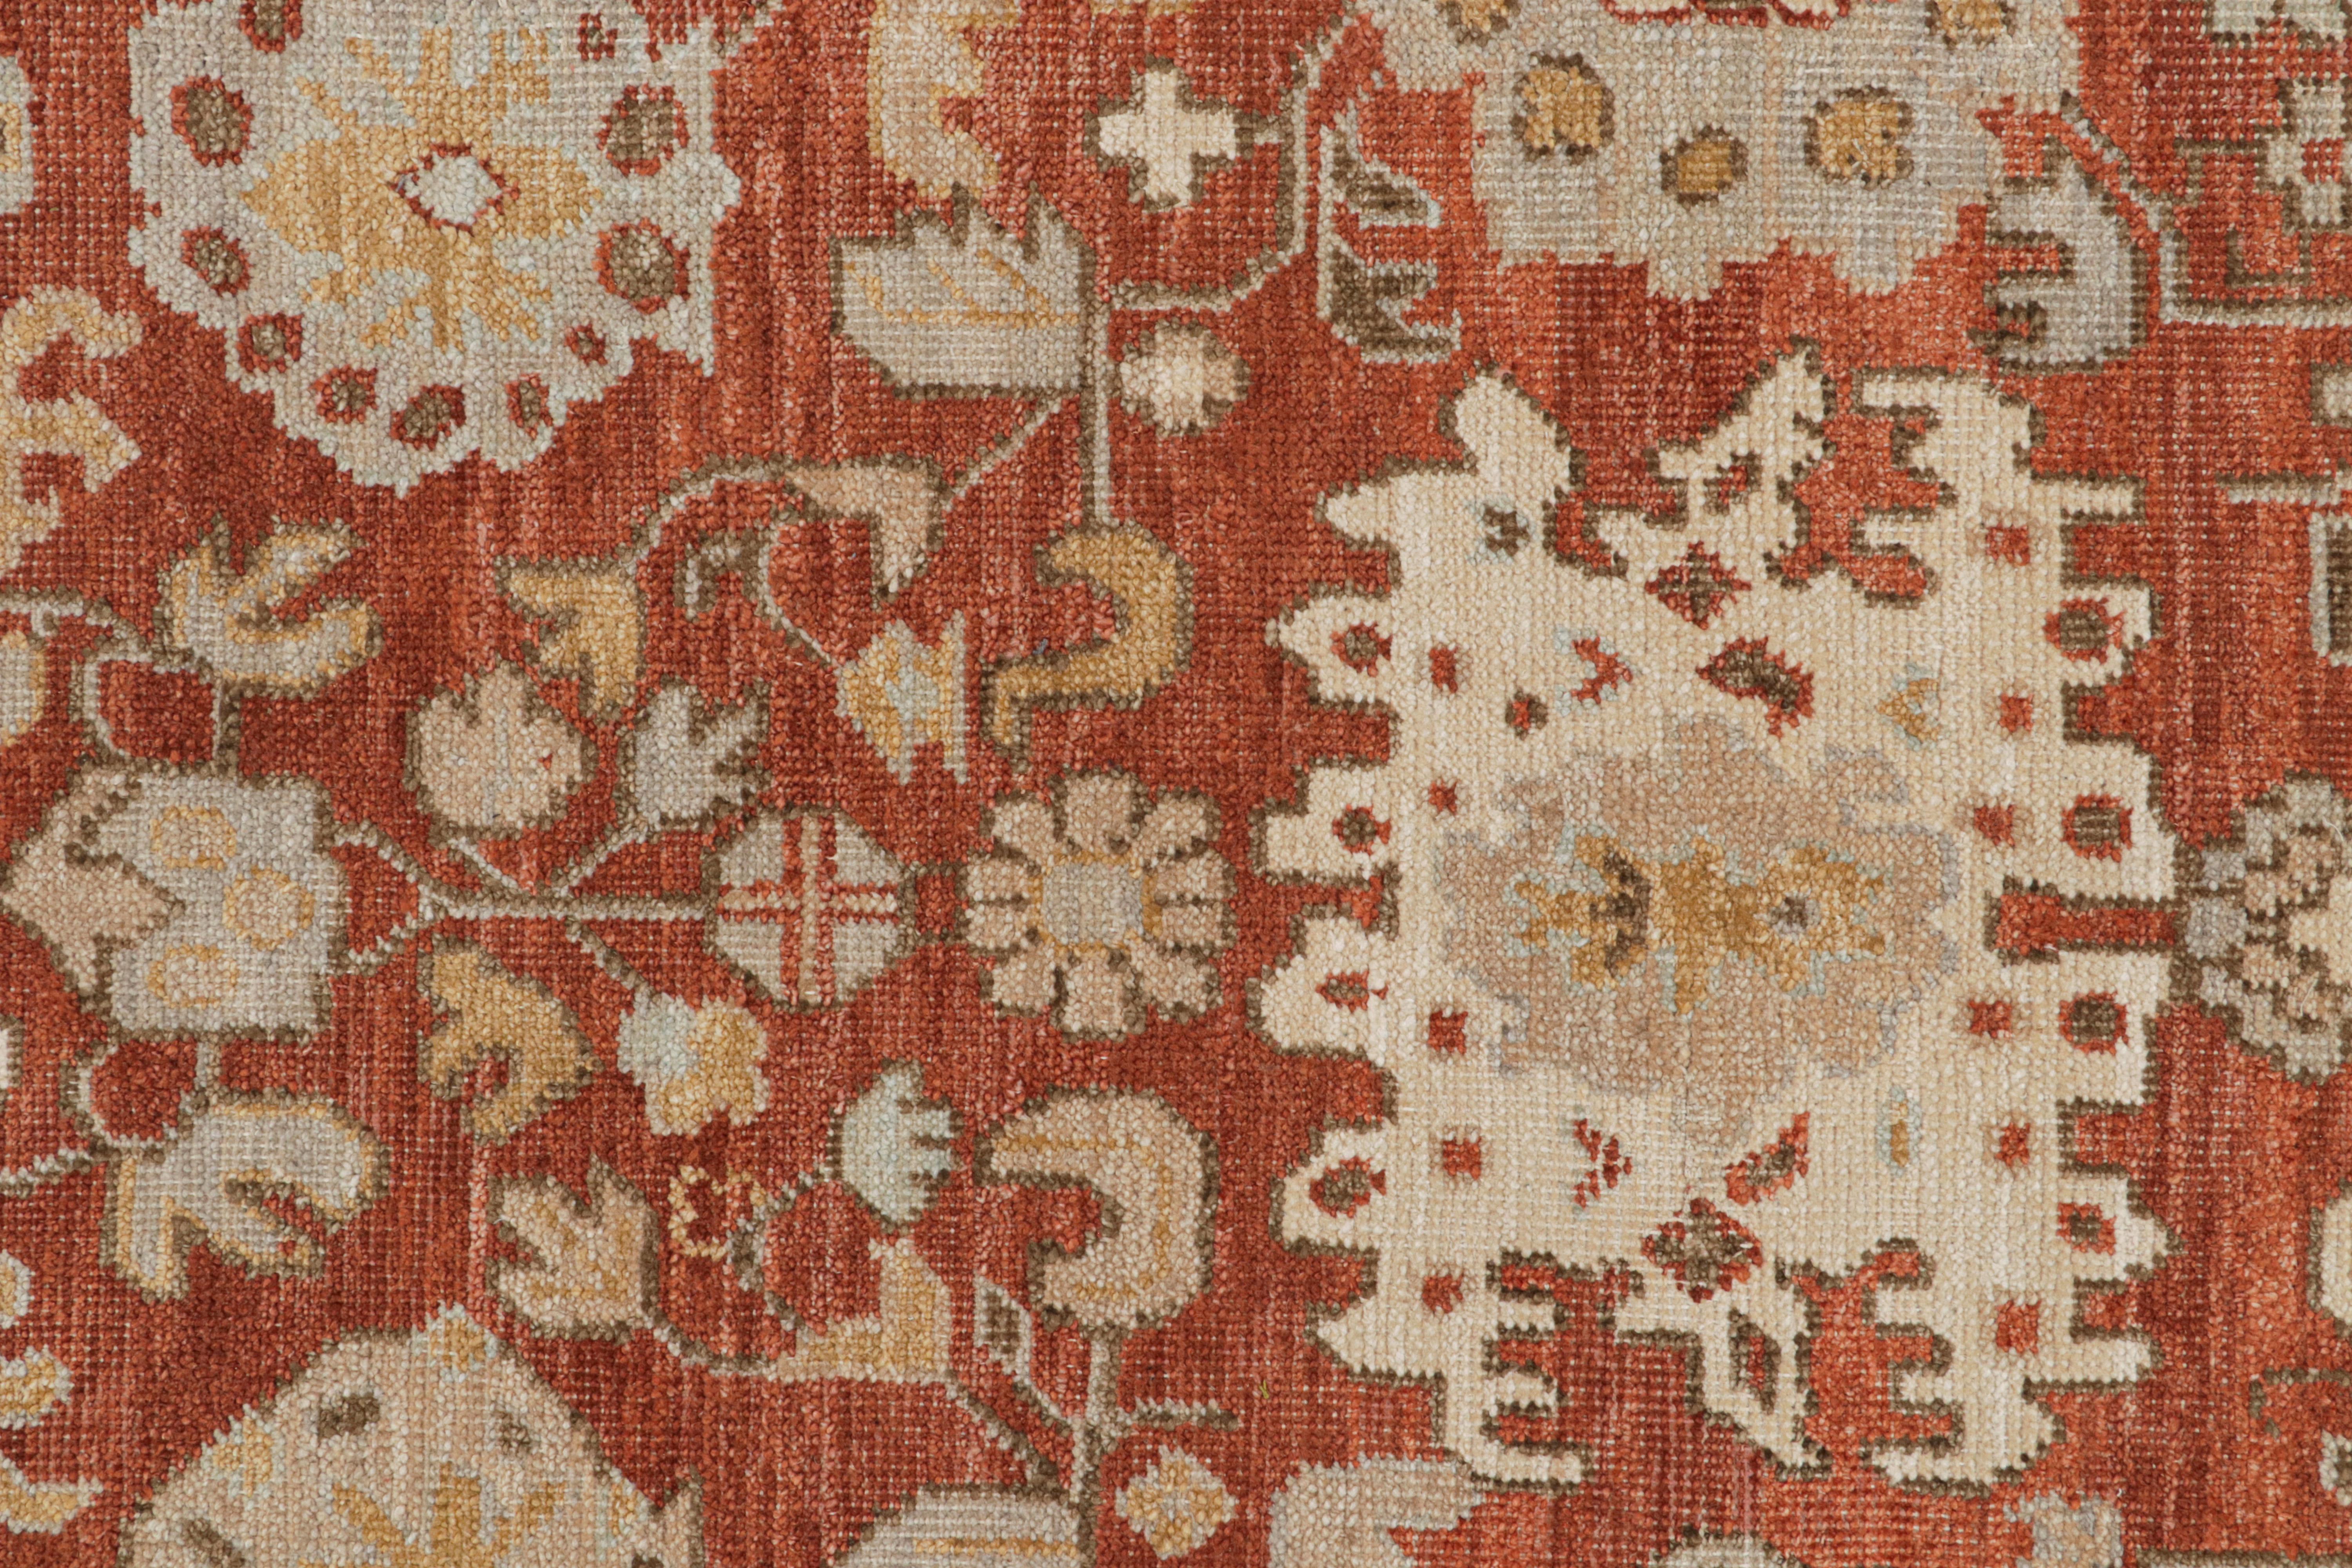 Contemporary Rug & Kilim’s Oushak style rug in Red, Blue & Brown Floral Patterns For Sale